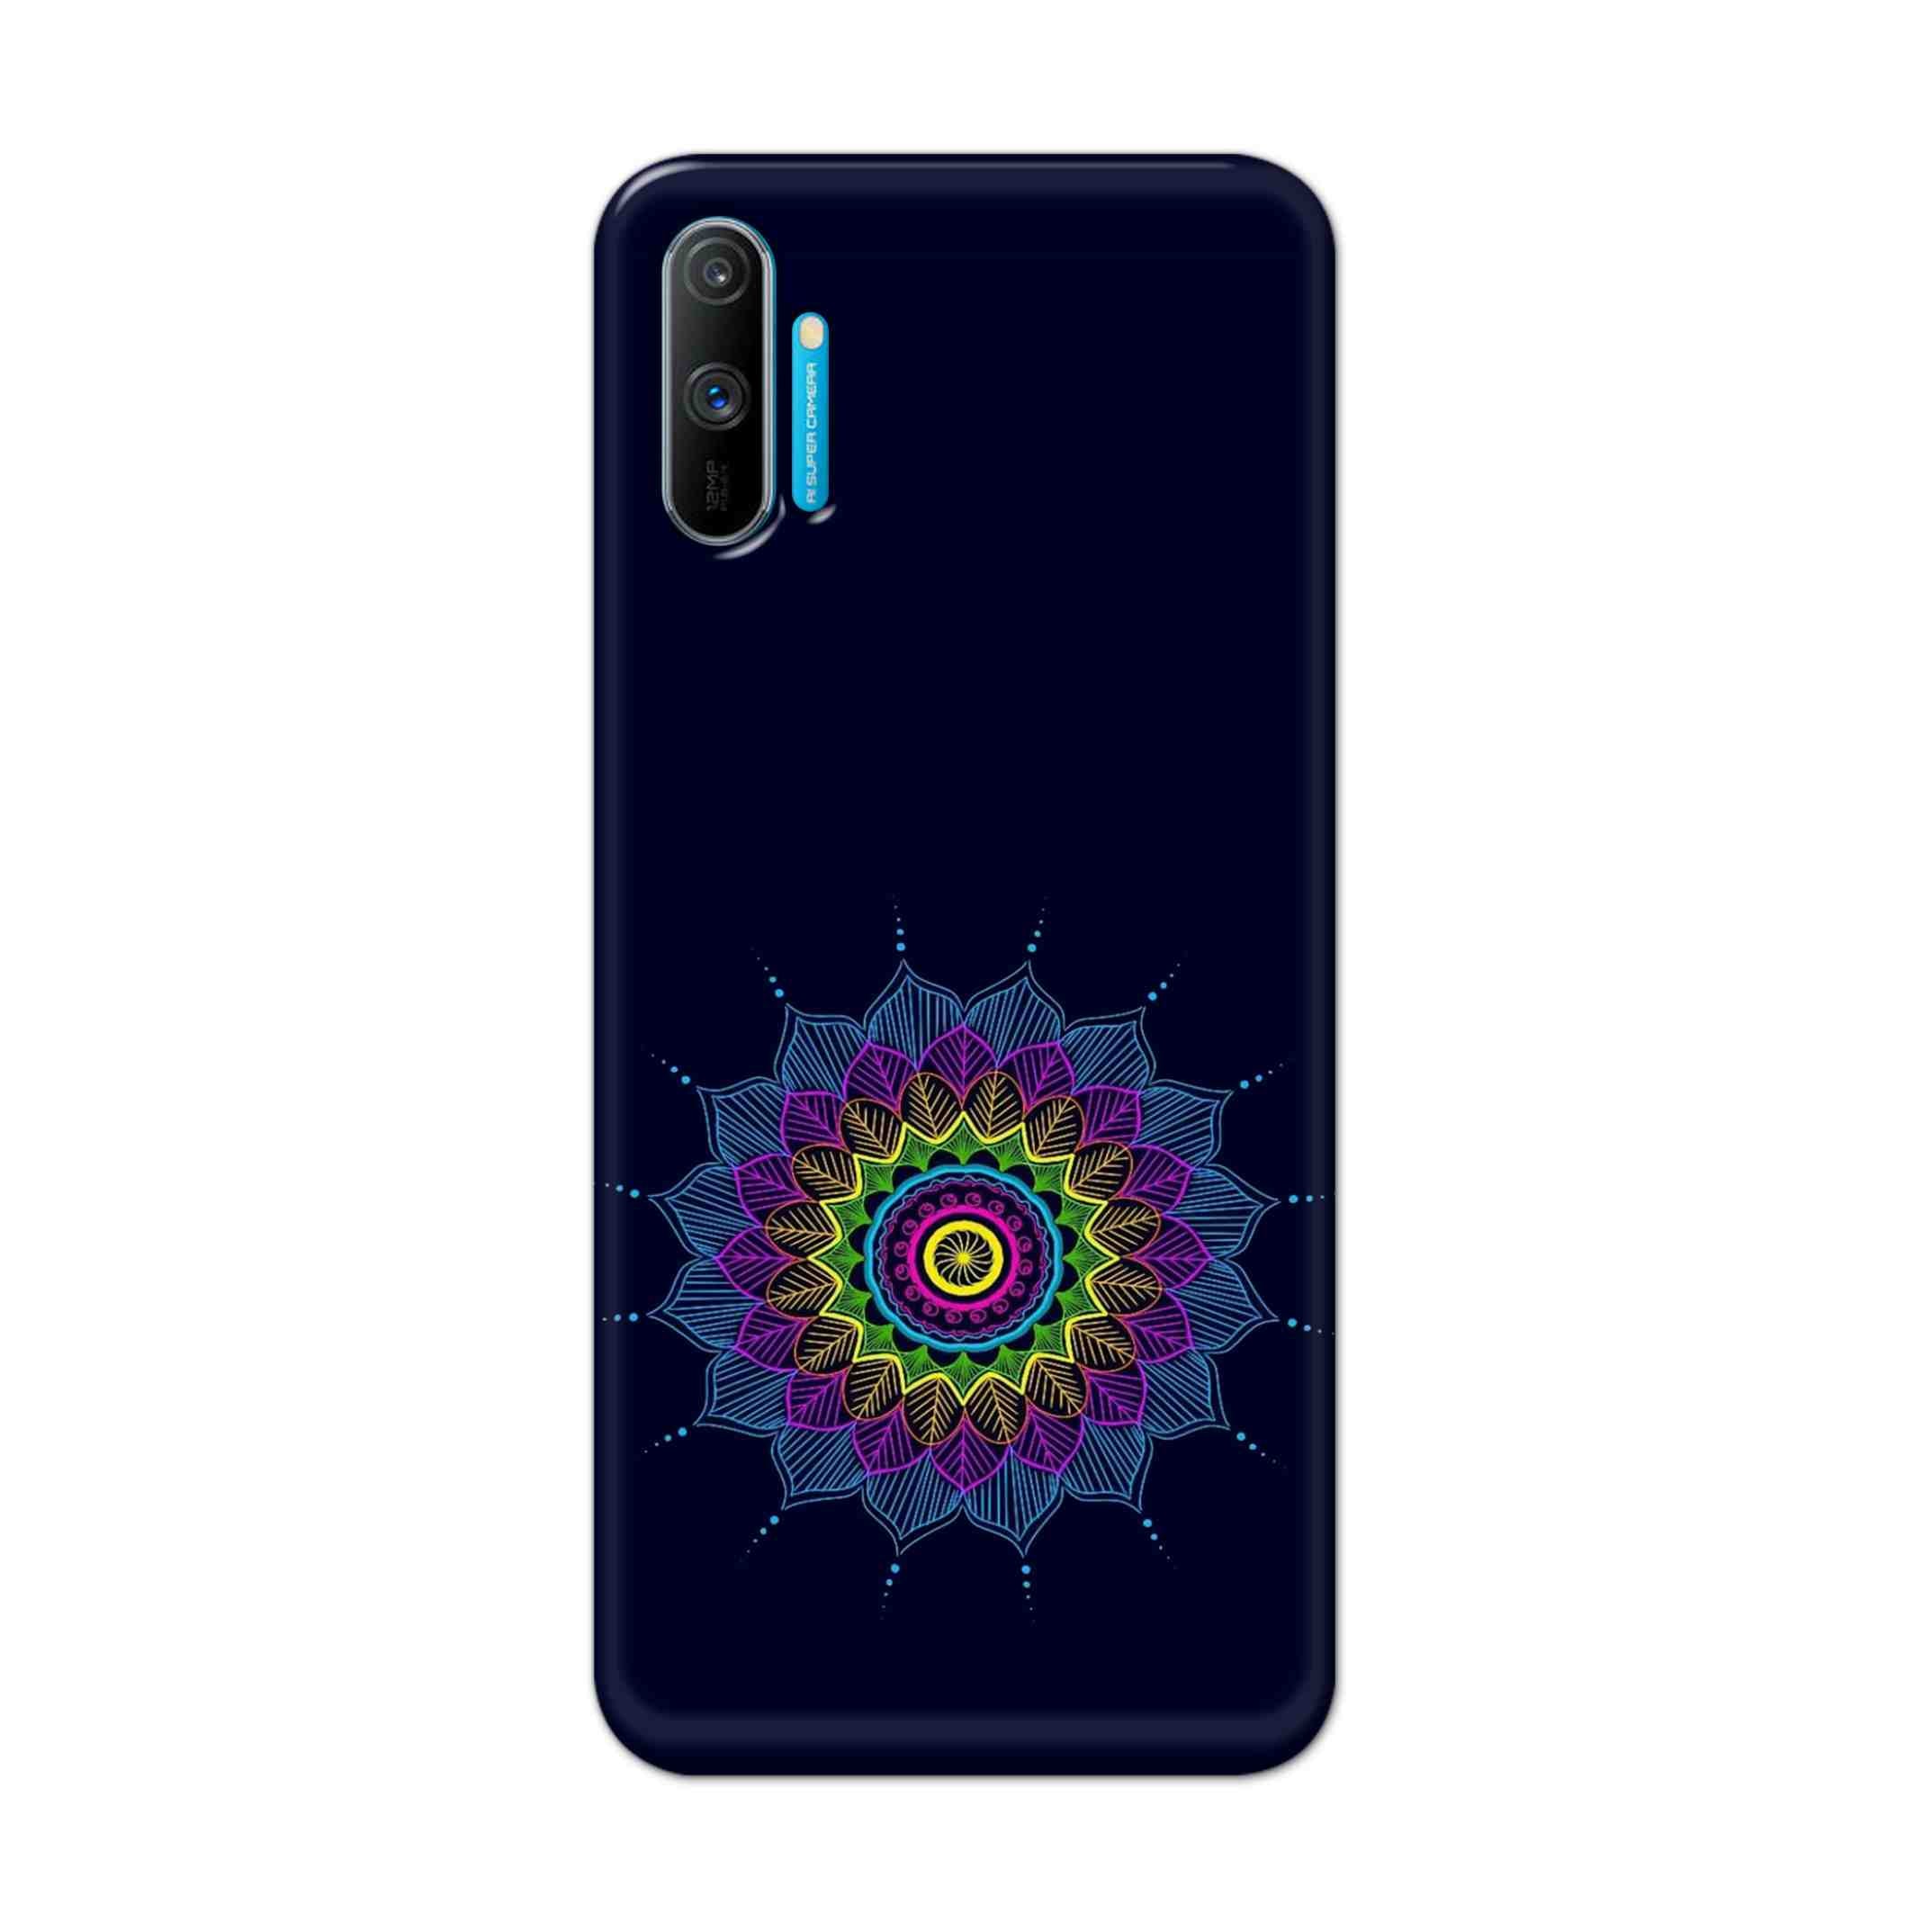 Buy Jung And Mandalas Hard Back Mobile Phone Case Cover For Realme C3 Online